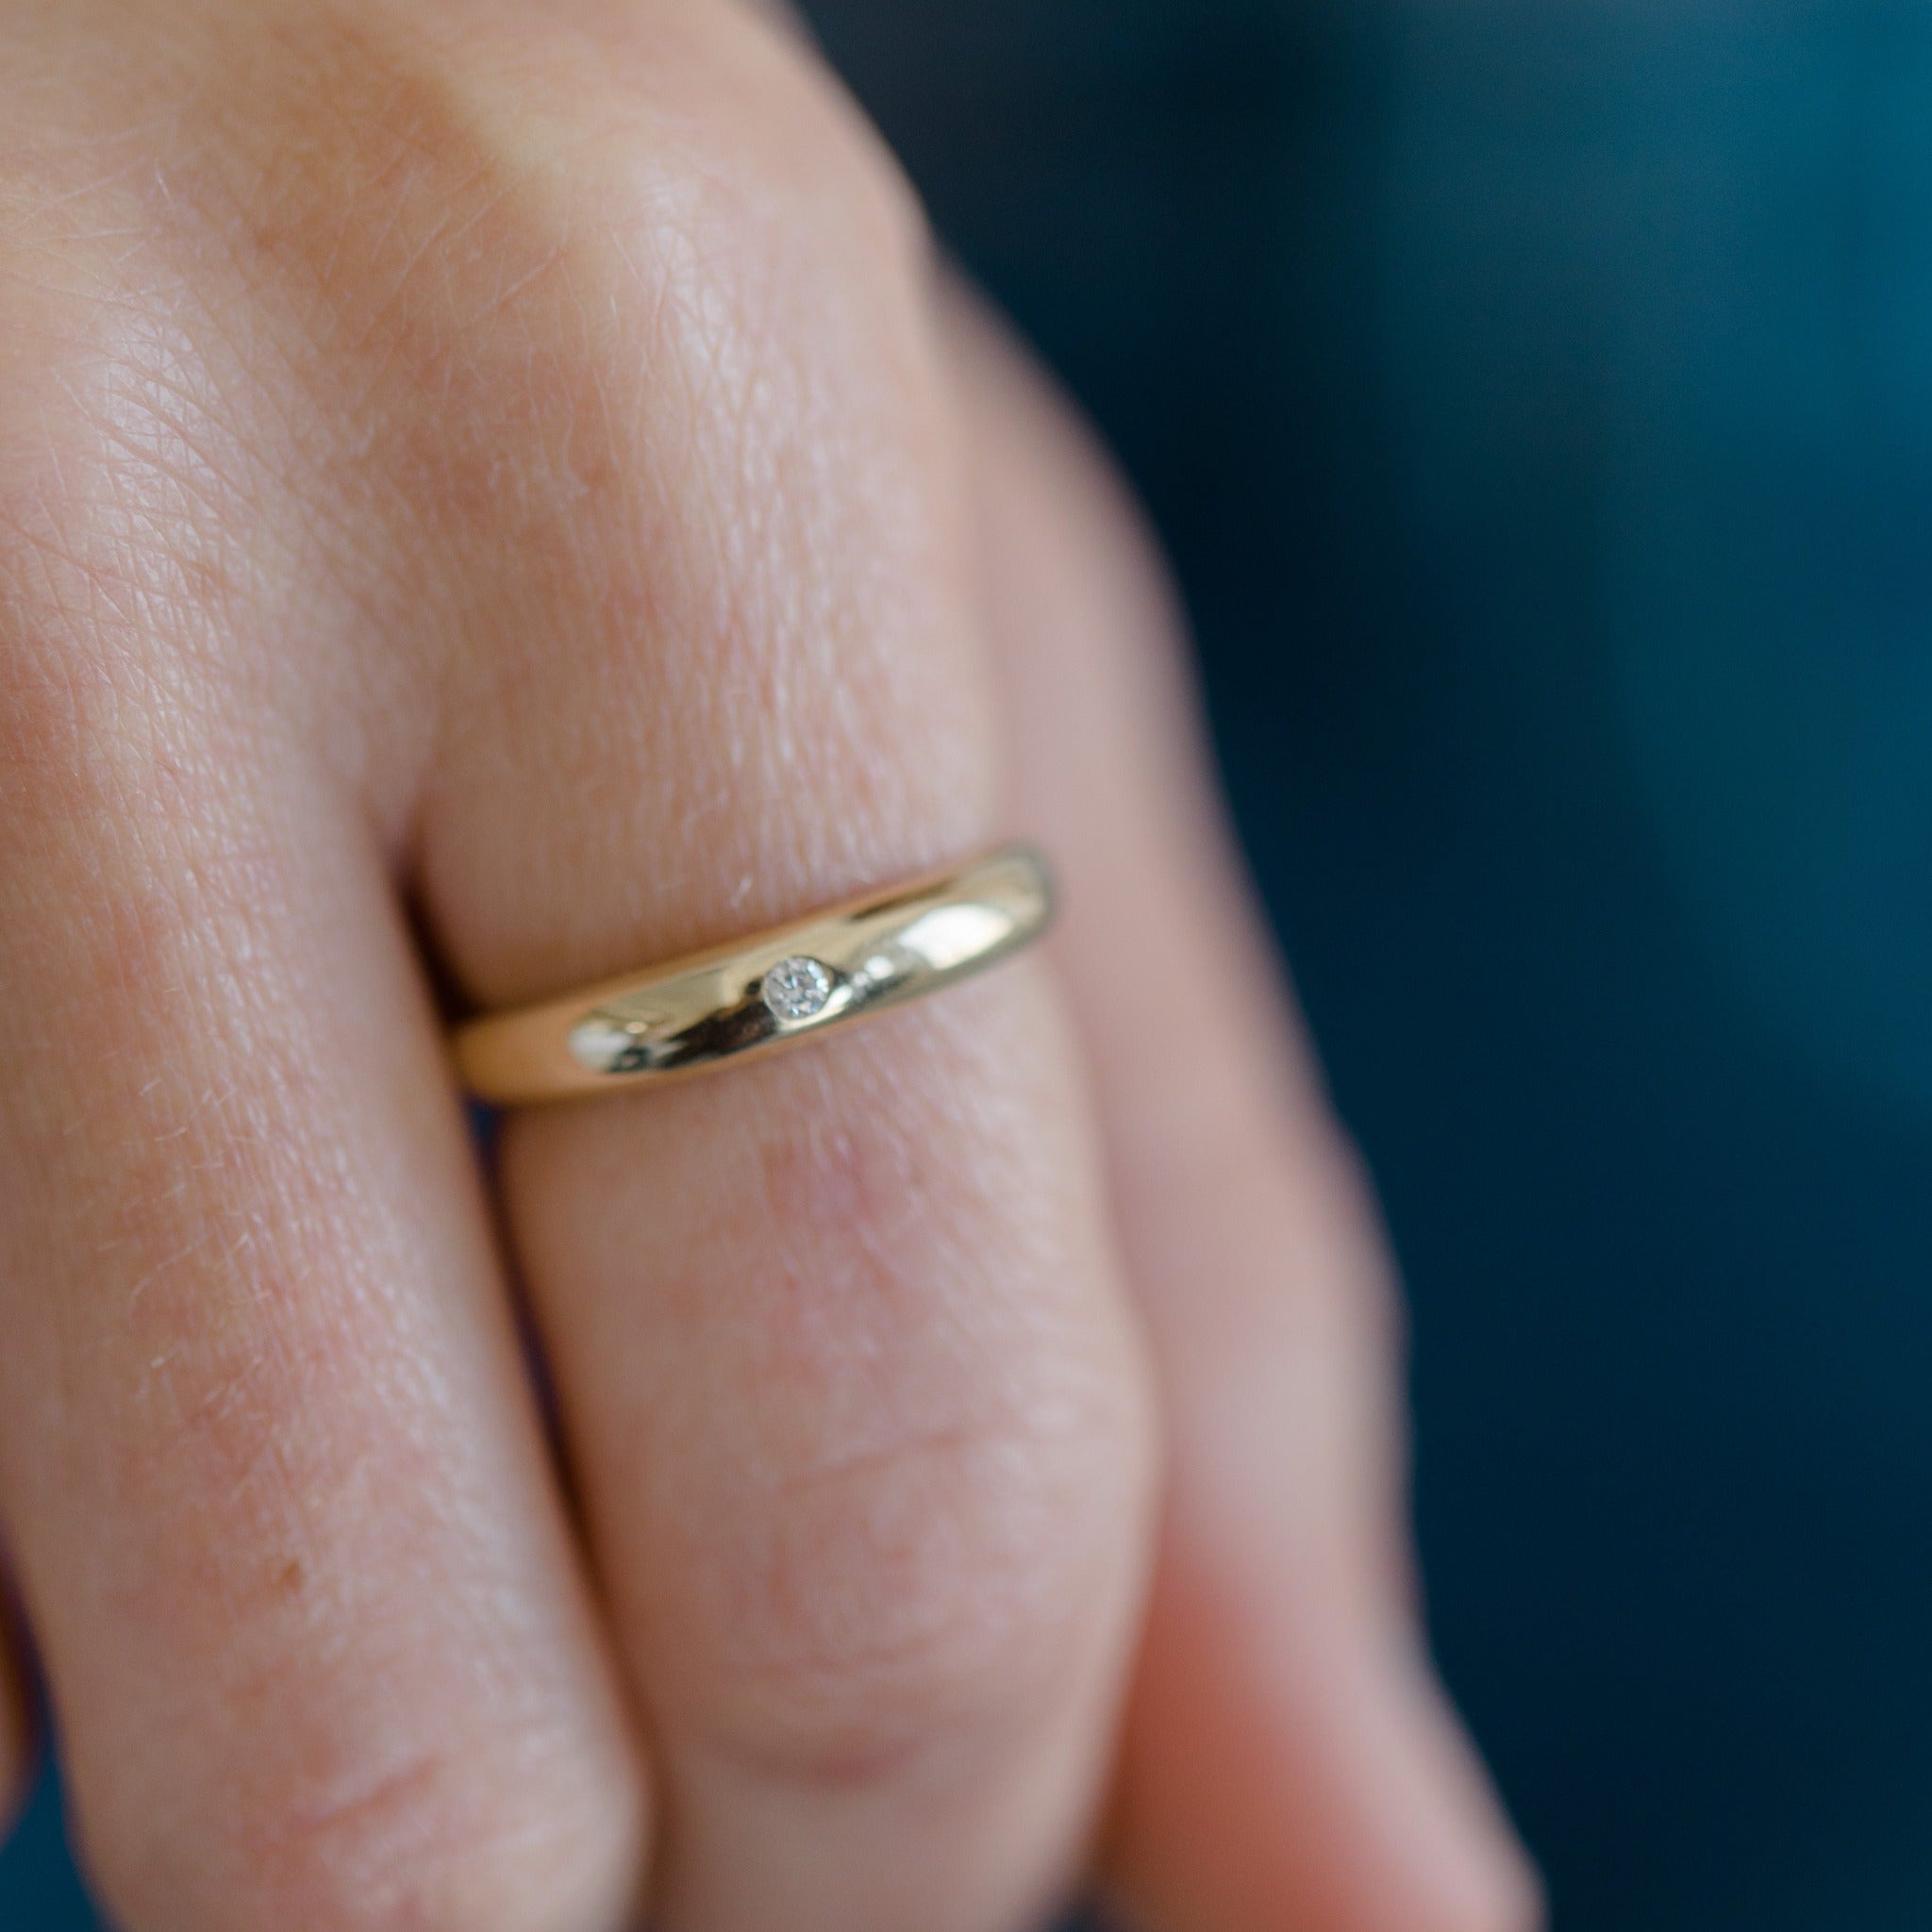 This gold ring can be worn on any finger. It is shown here on the pointer finger. It is timeless and modern. This ring can be worn everyday. It is solid gold and sturdy. A great 14k gold modern heirloom piece.